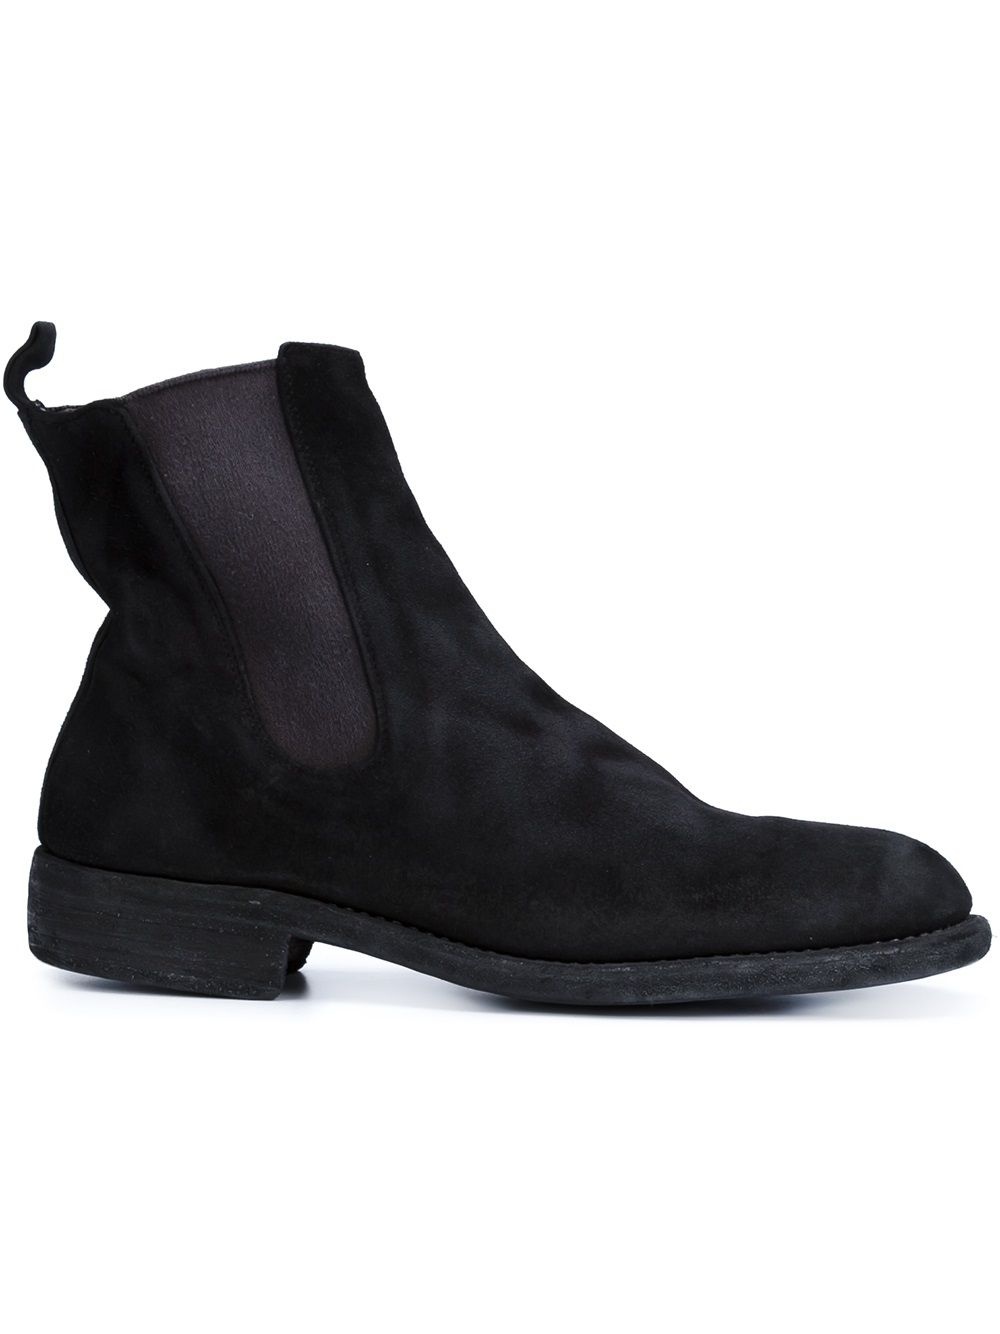 chelsea boots - 1